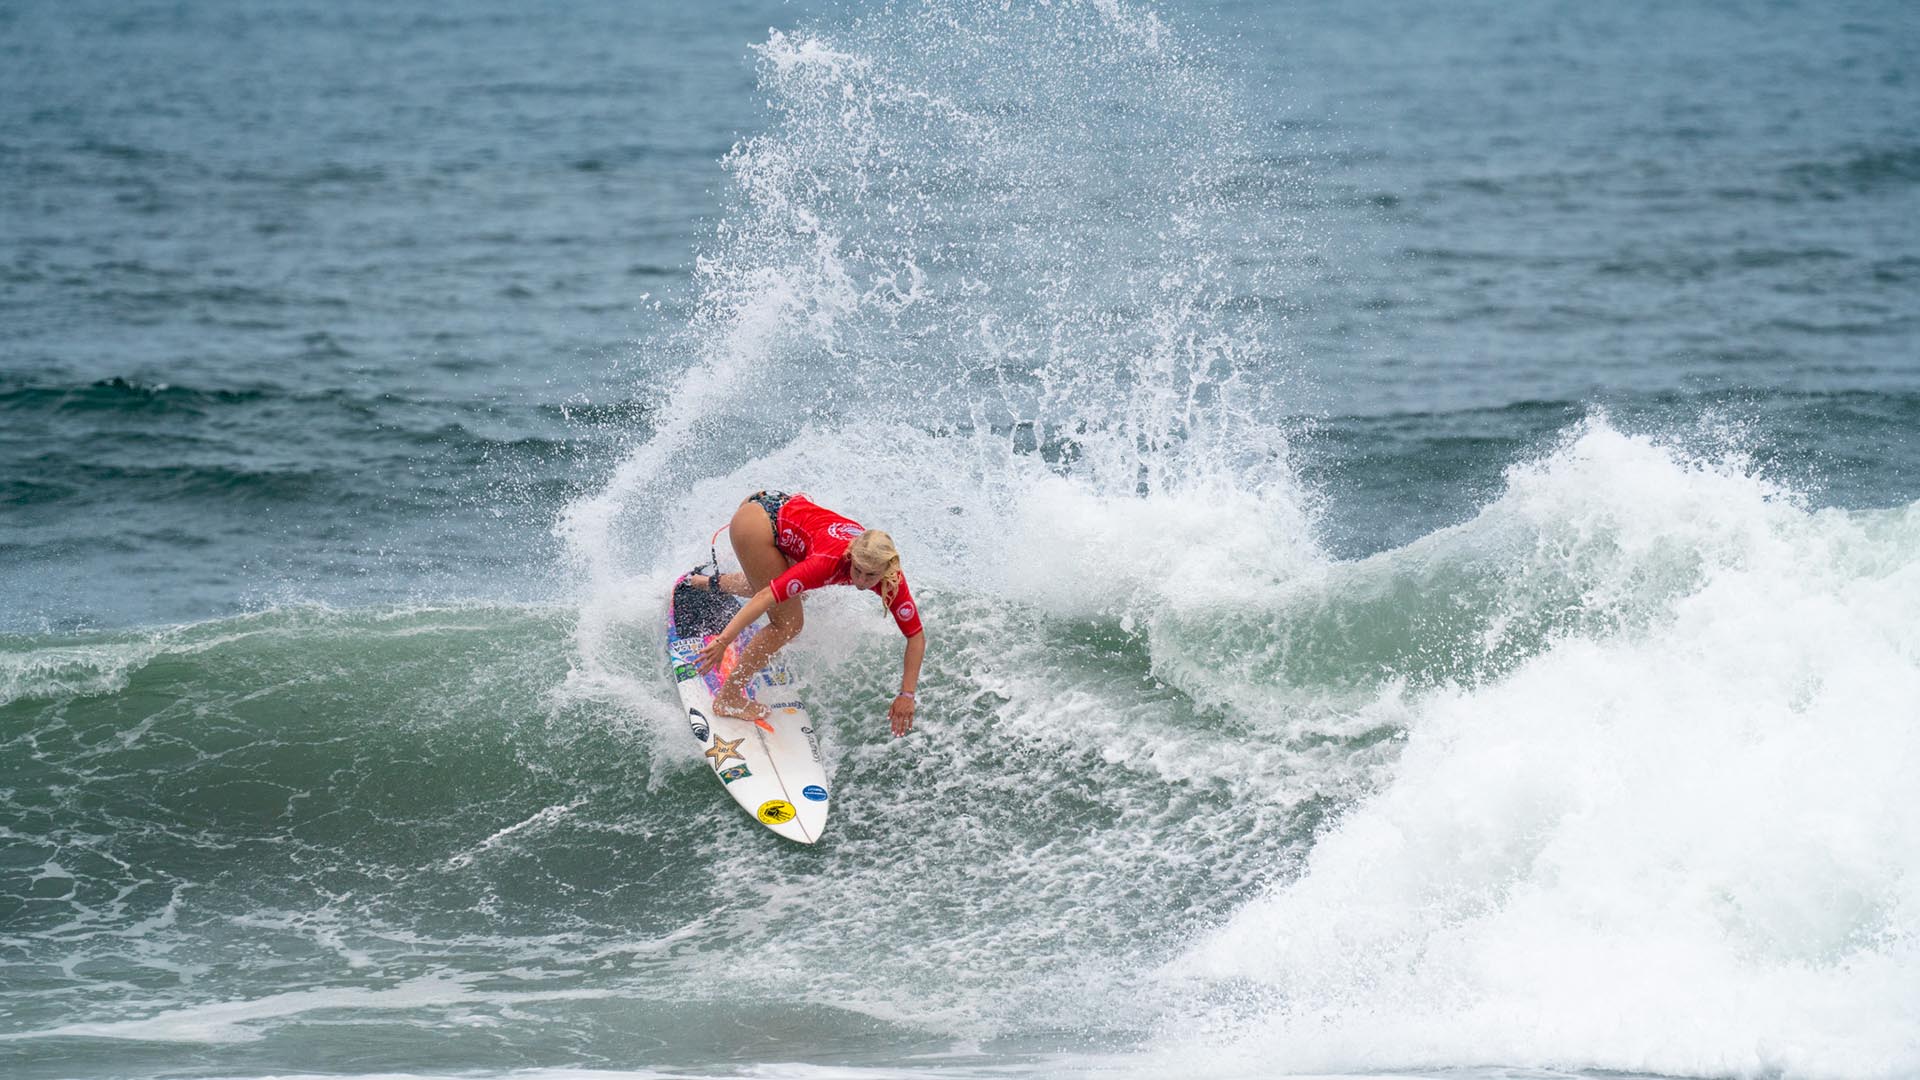 El Salvador hosted the 2023 ISA World Surfing Games show: qualifiers for Paris and world champion title for Mexico and Brazil